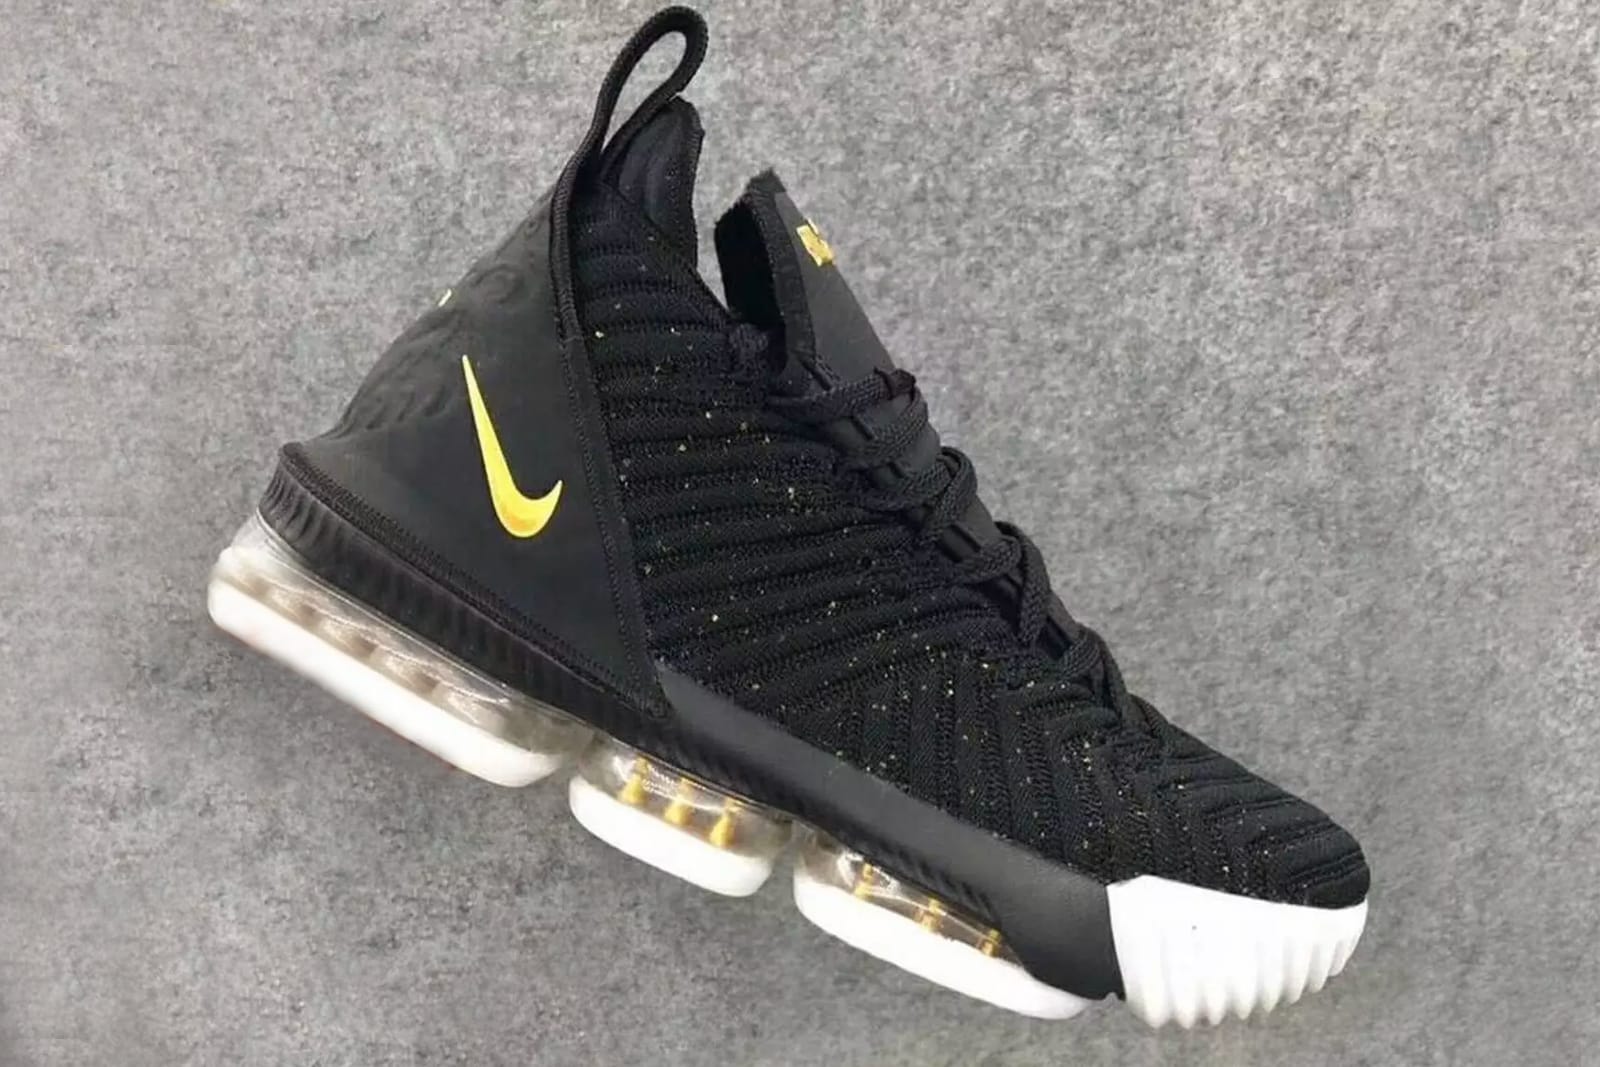 Nike LeBron 16 Gears up for Its Debut 